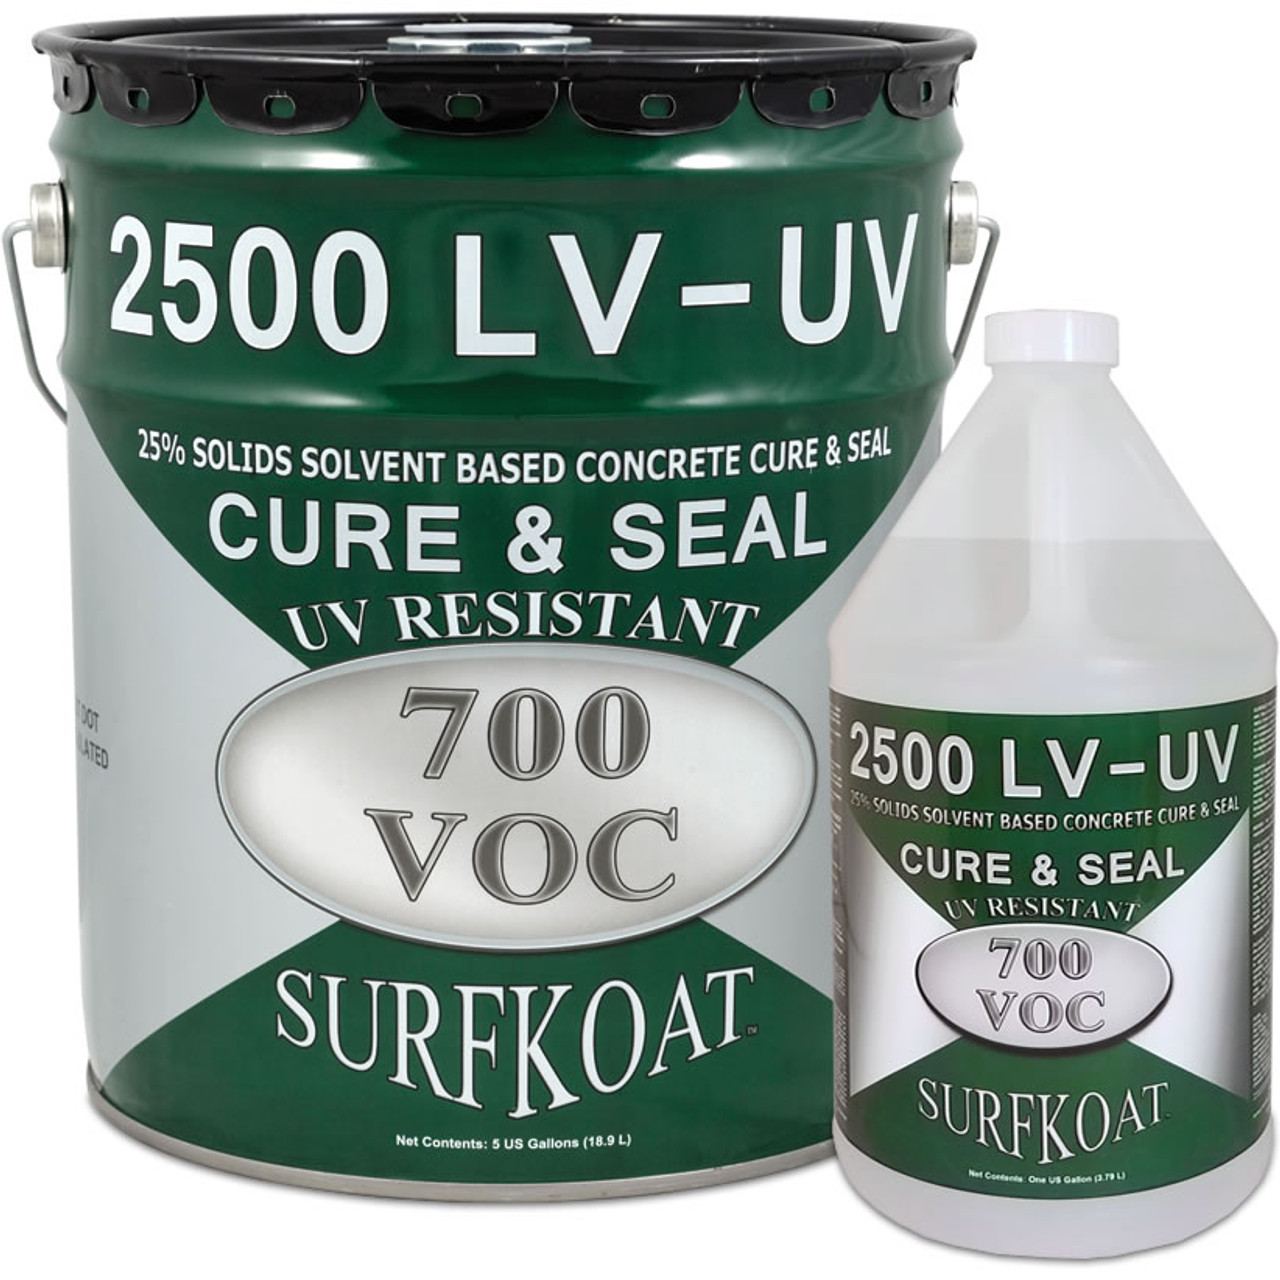 Concrete Cure & Seal 25  UV Acrylic Curing Compound